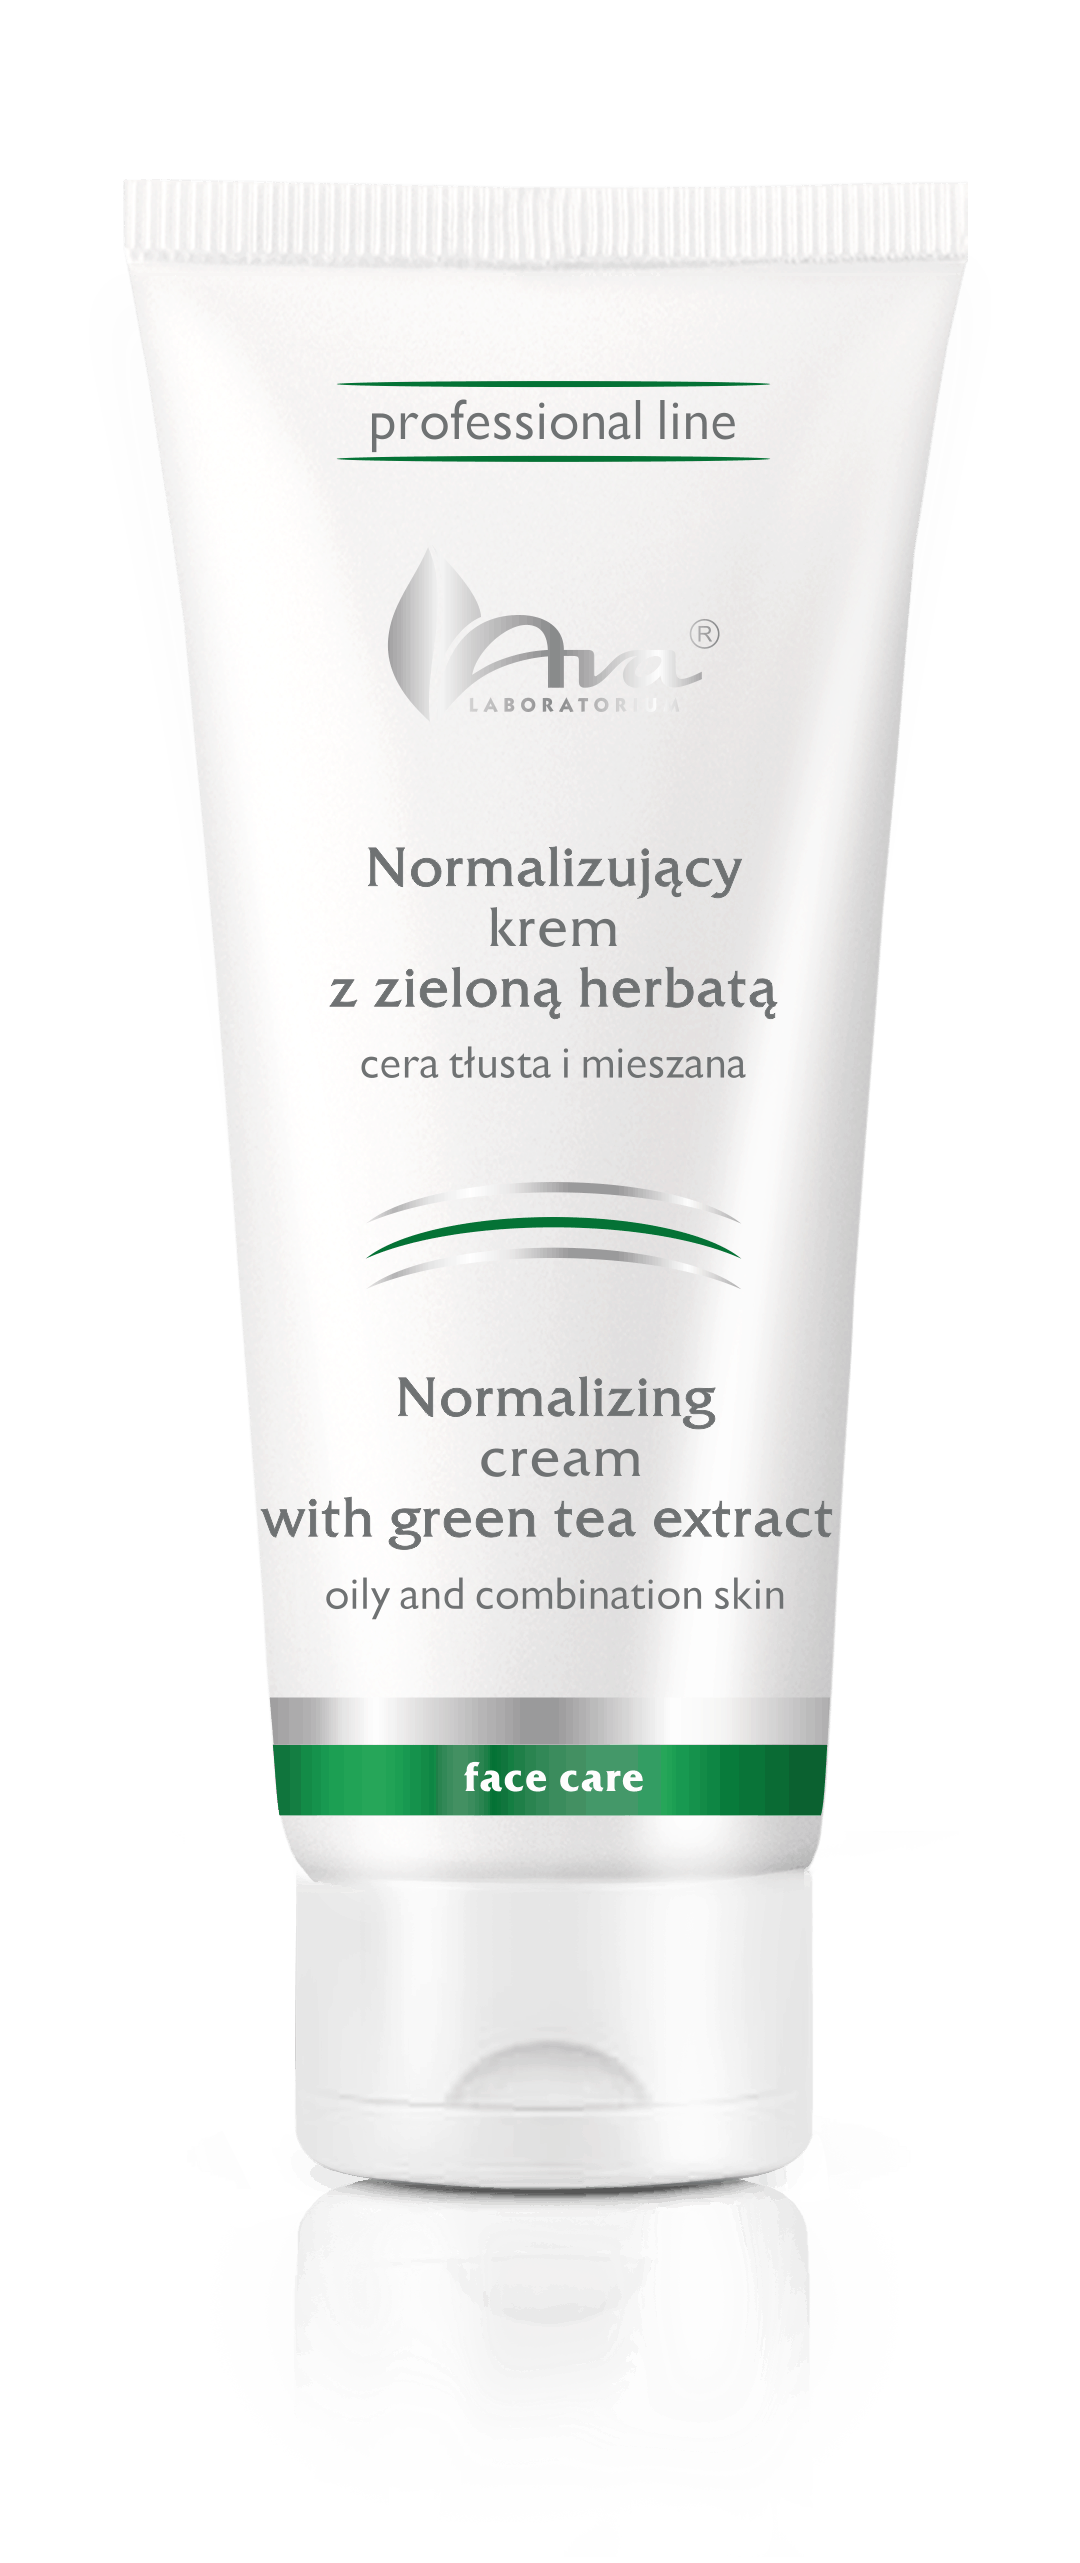 Normalizing cream with Green Tea extract